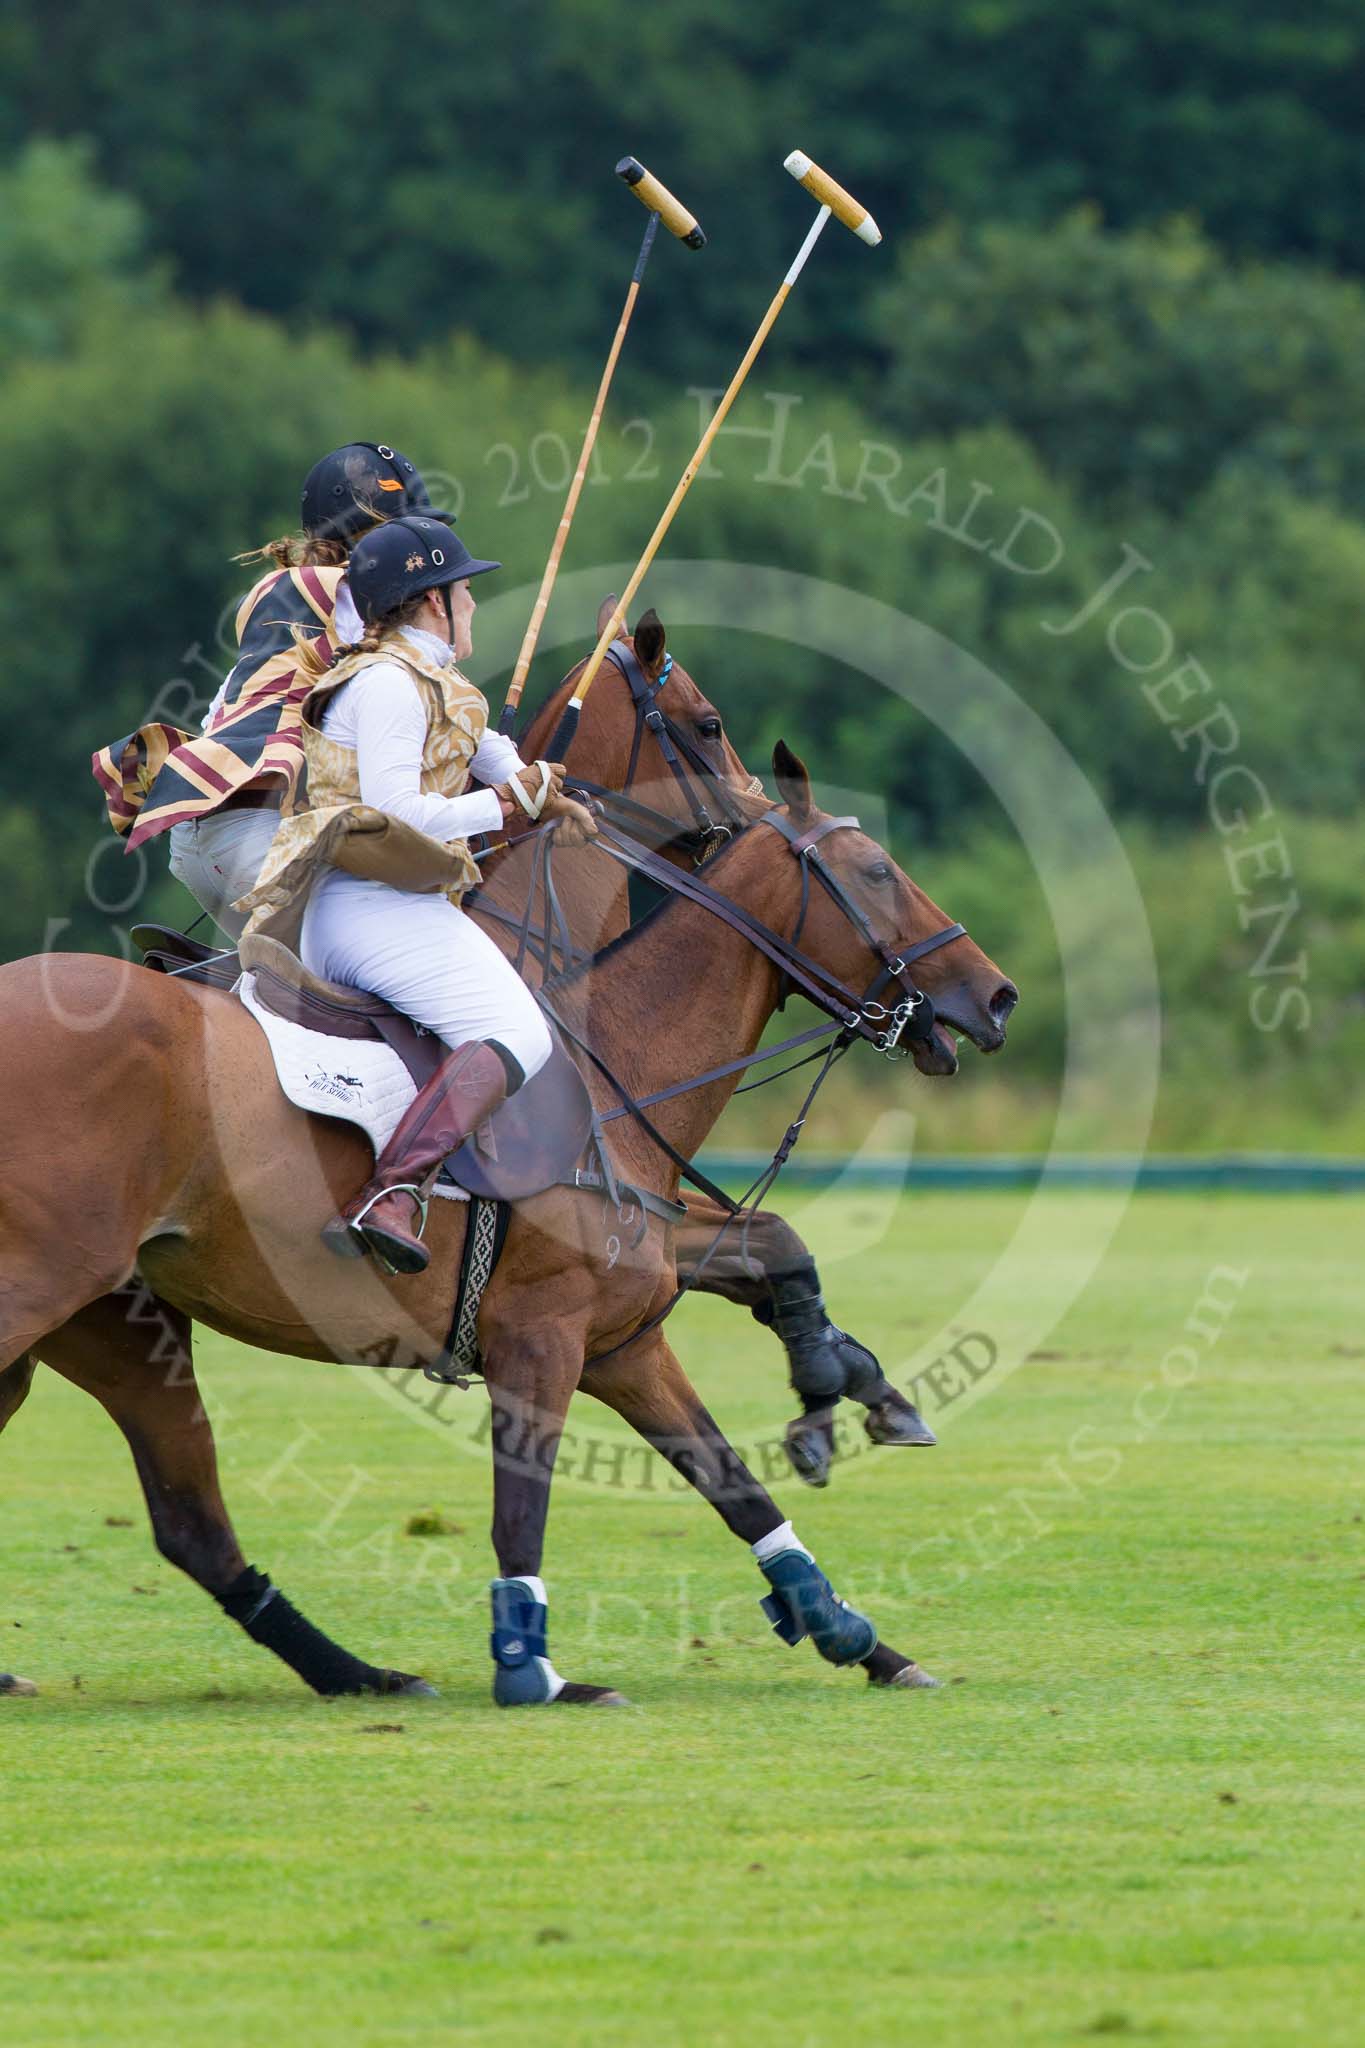 7th Heritage Polo Cup semi-finals: Rosie Ross leads on the ball. Barbara P Zingg on the ride off..
Hurtwood Park Polo Club,
Ewhurst Green,
Surrey,
United Kingdom,
on 04 August 2012 at 13:32, image #144